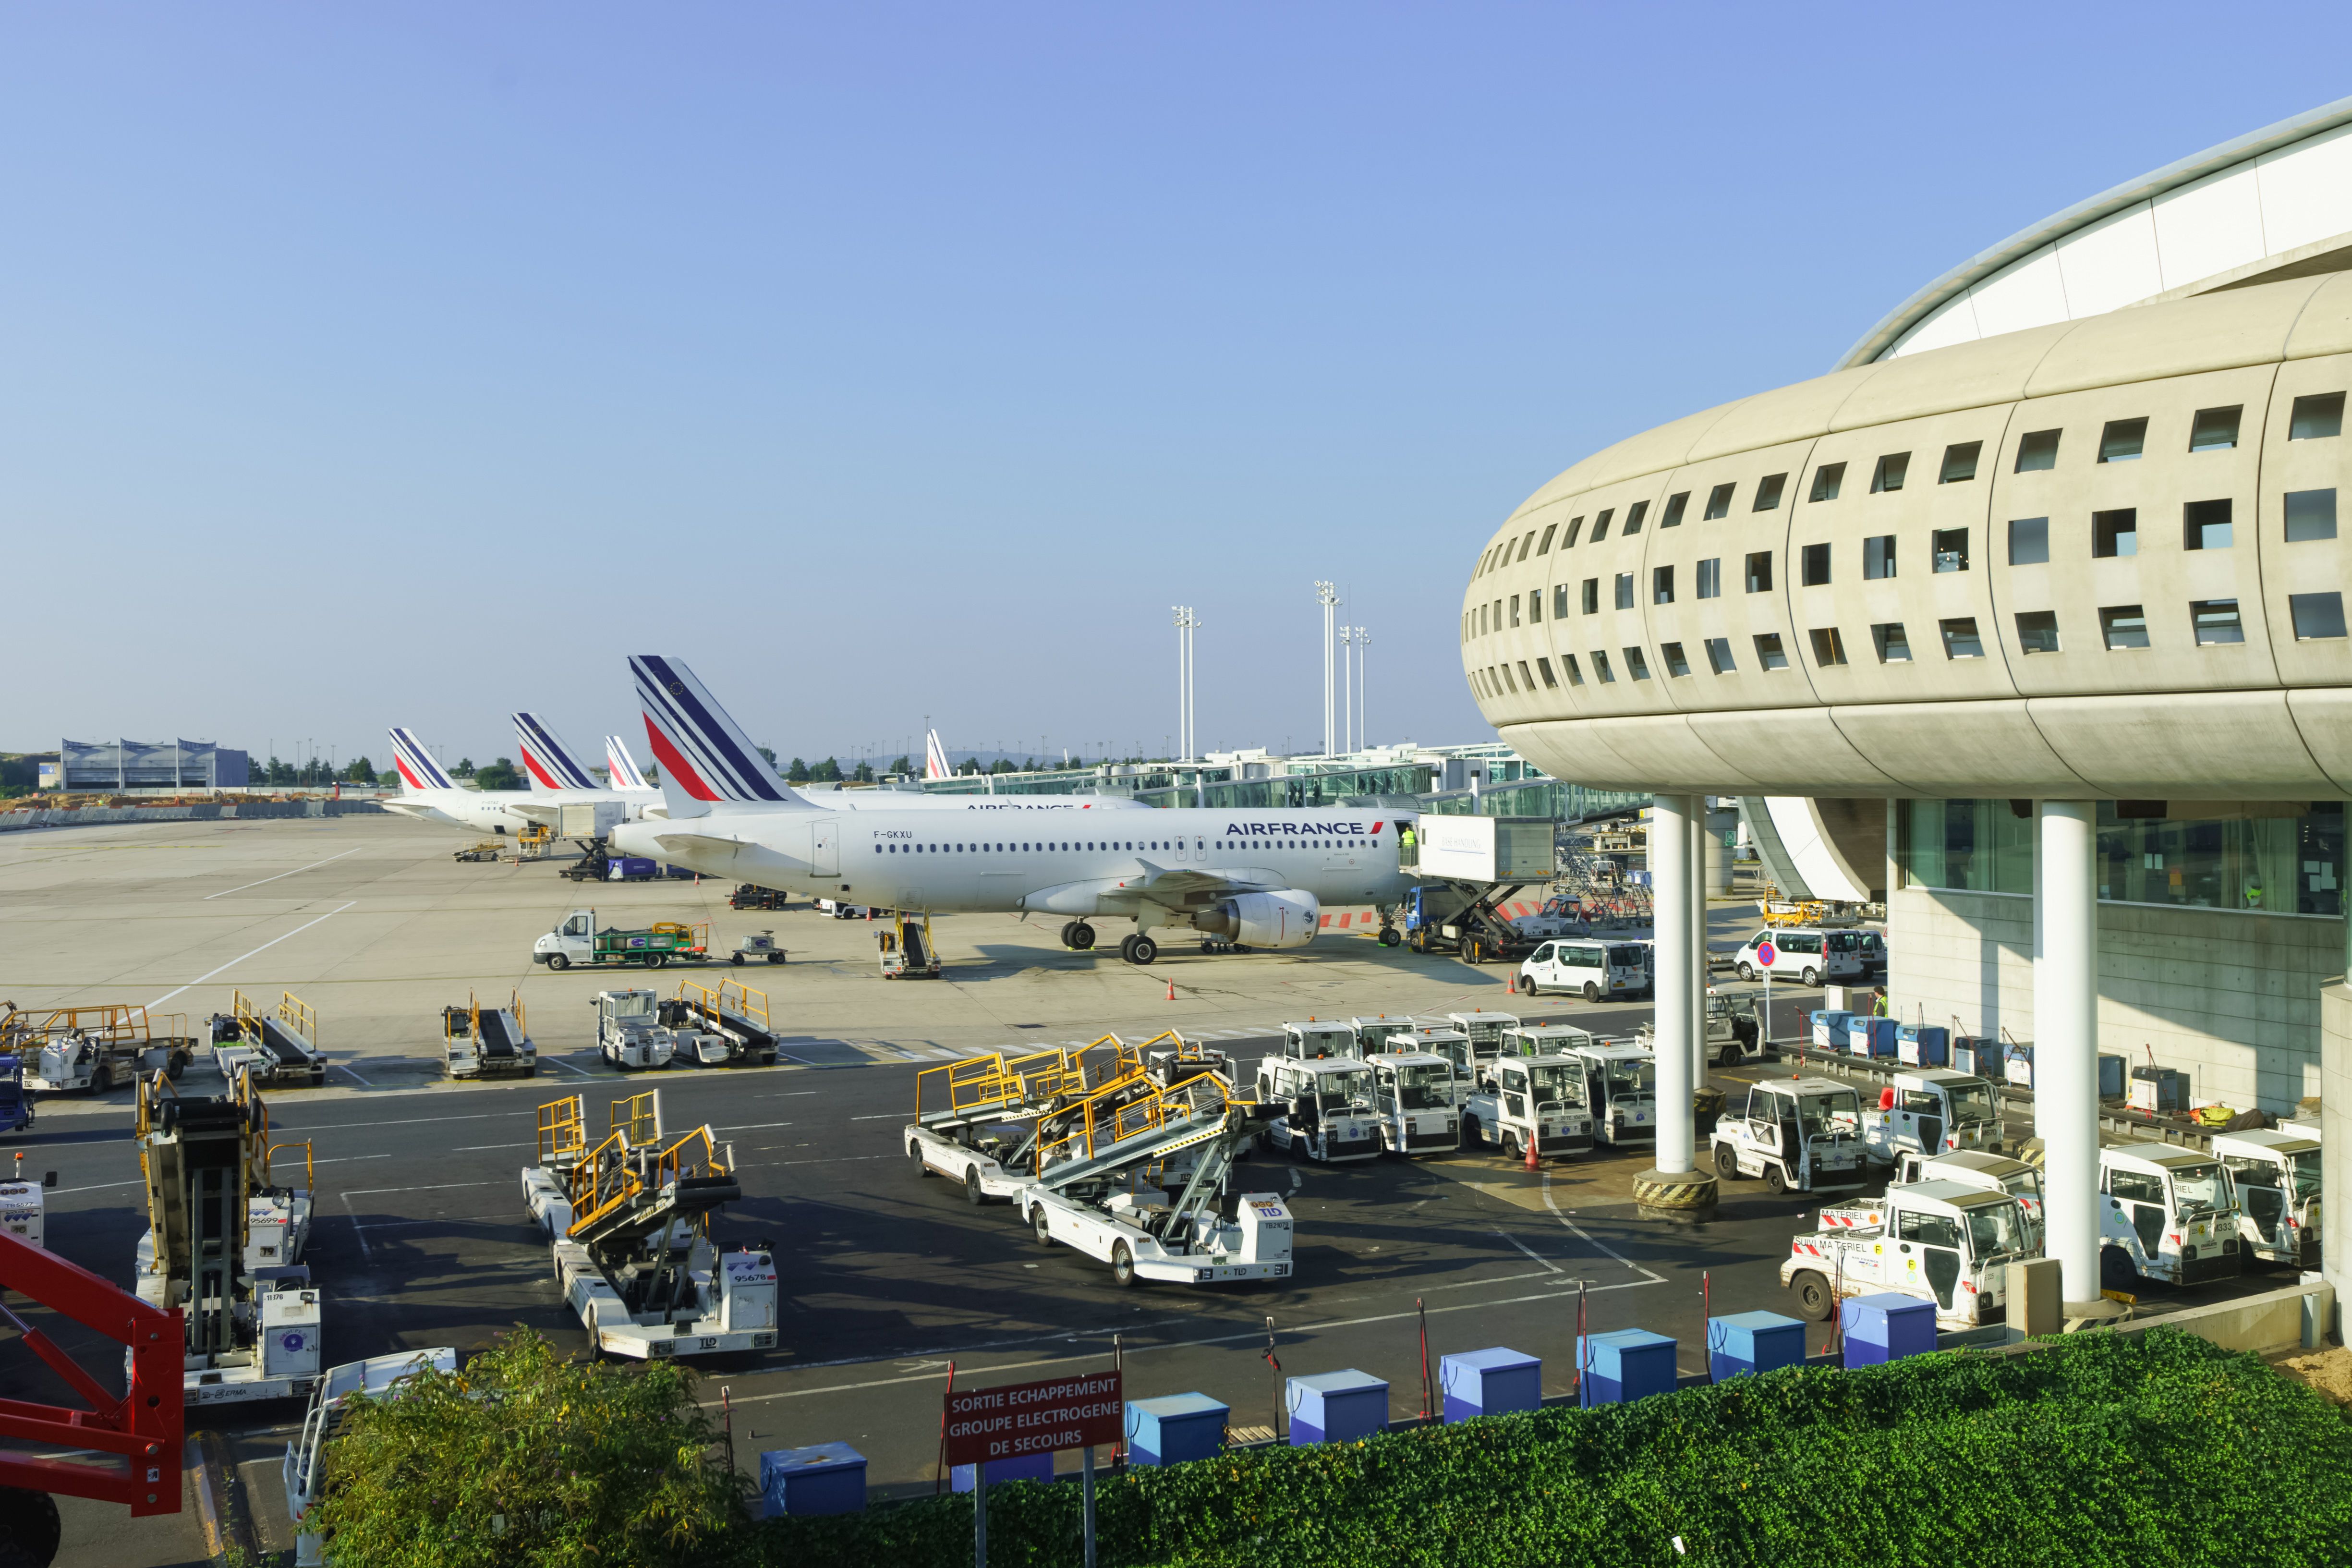 Several Air France aircraft parked on the apron at Paris Charles de Gaulle Airport Terminal 1.